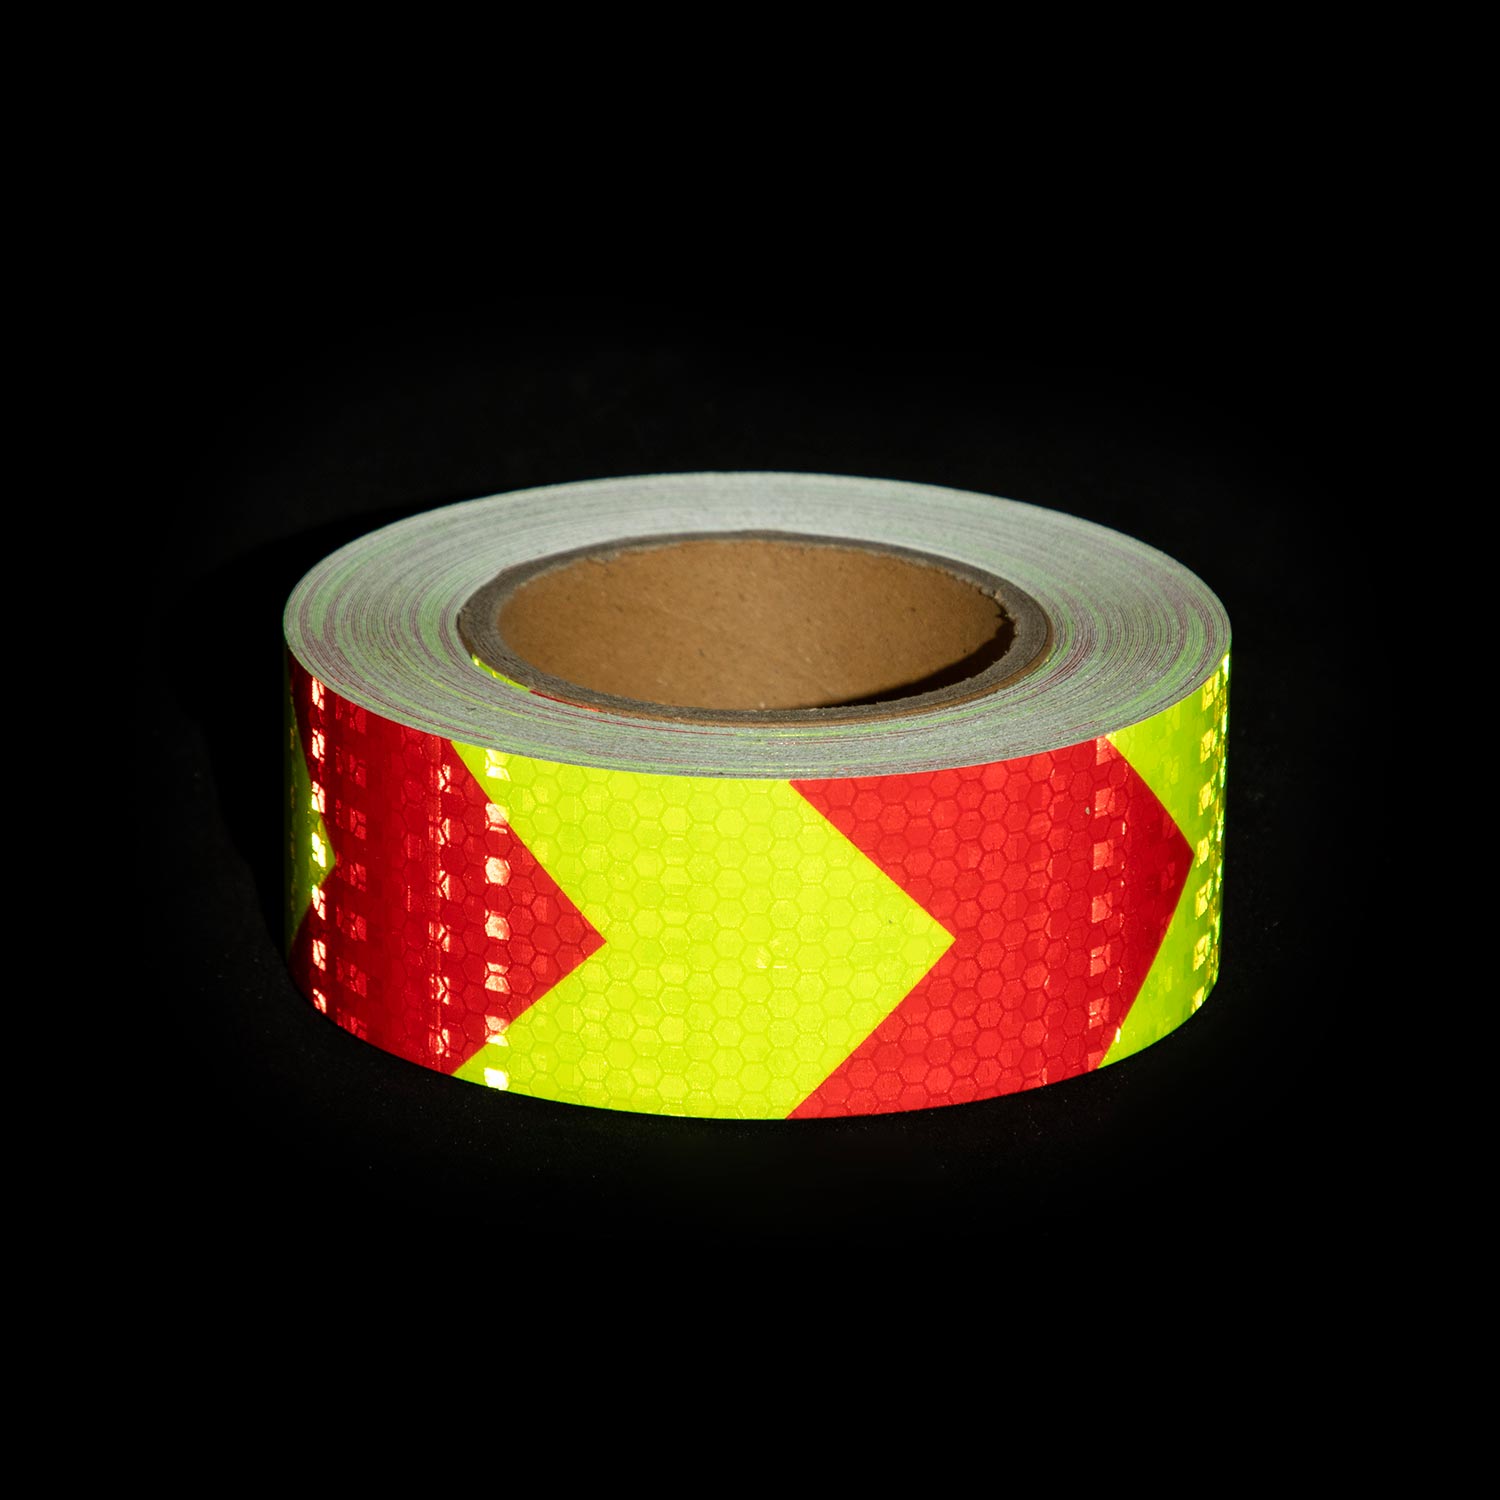 High Visibility Waterproof Adhesive PVC Arrow Reflective Safety Warning Tape 